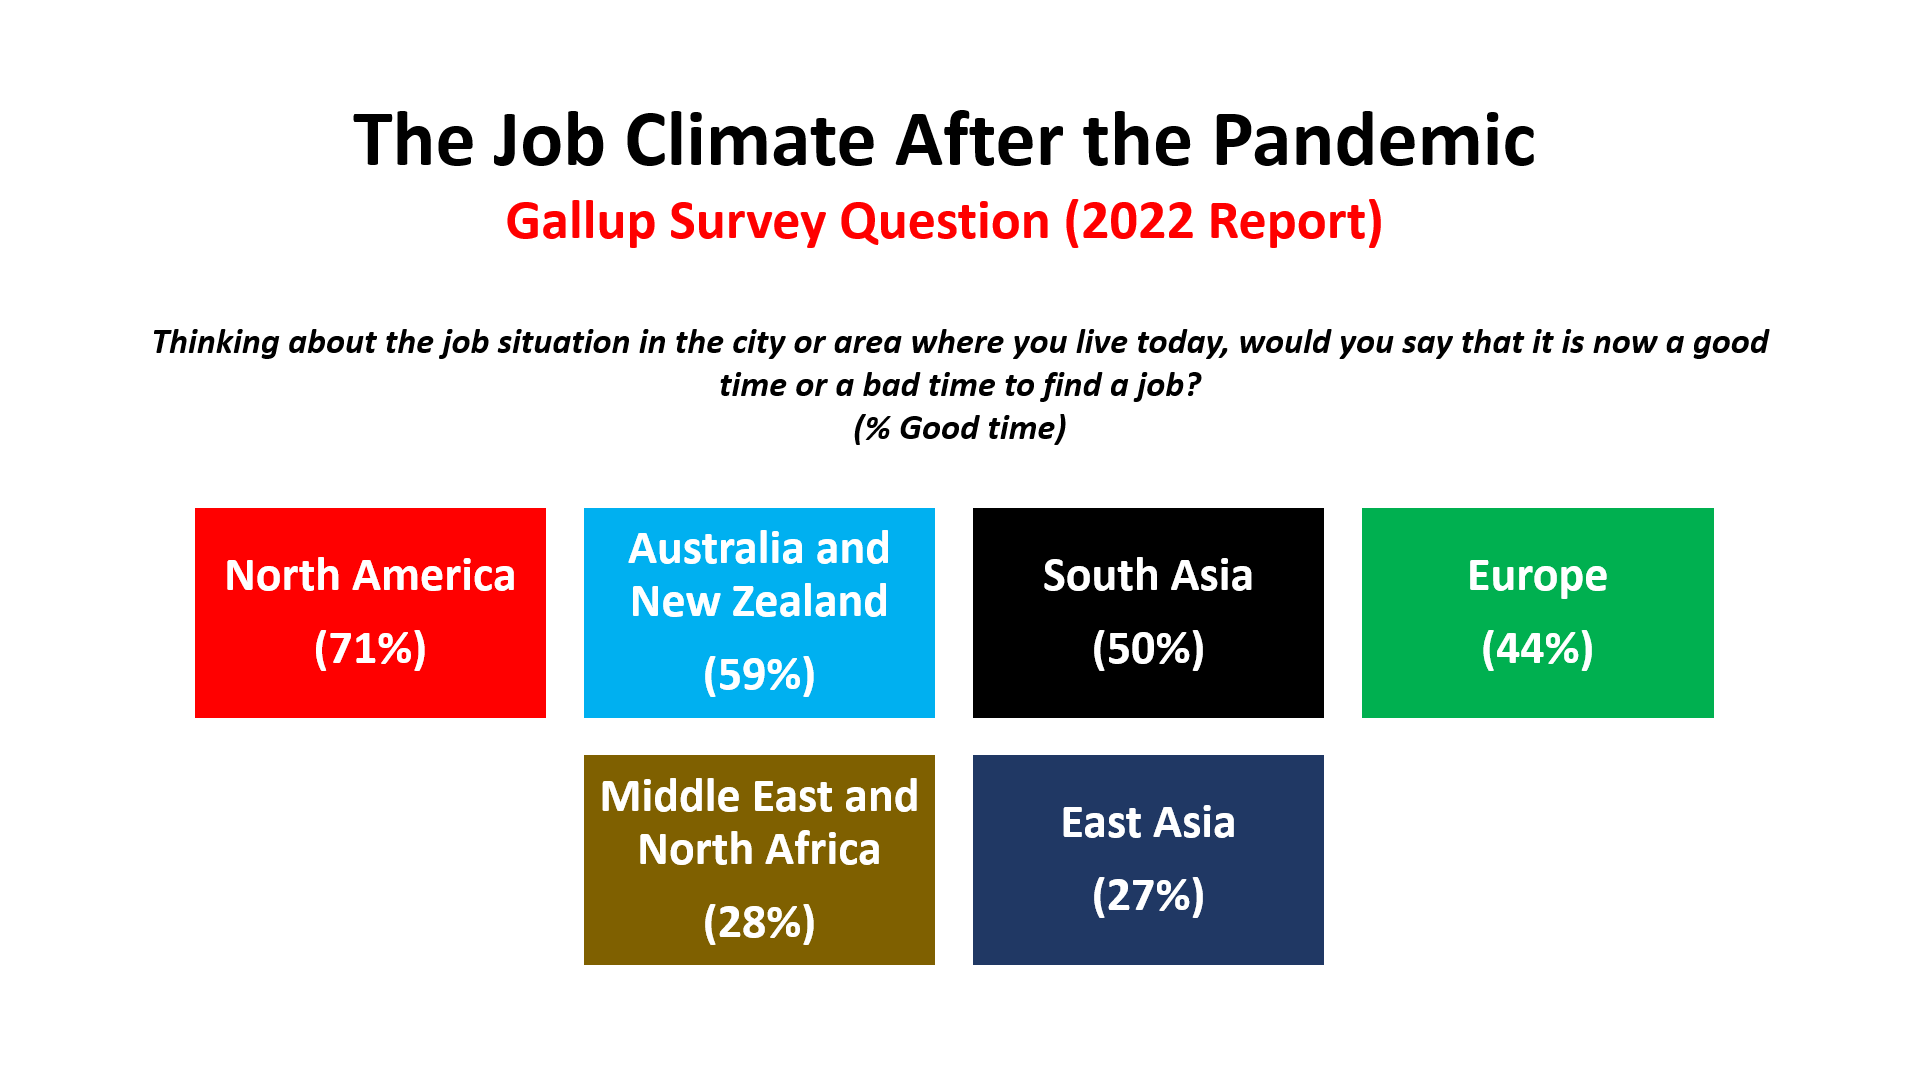 Additional Insights from the Gallup Global Workplace Report